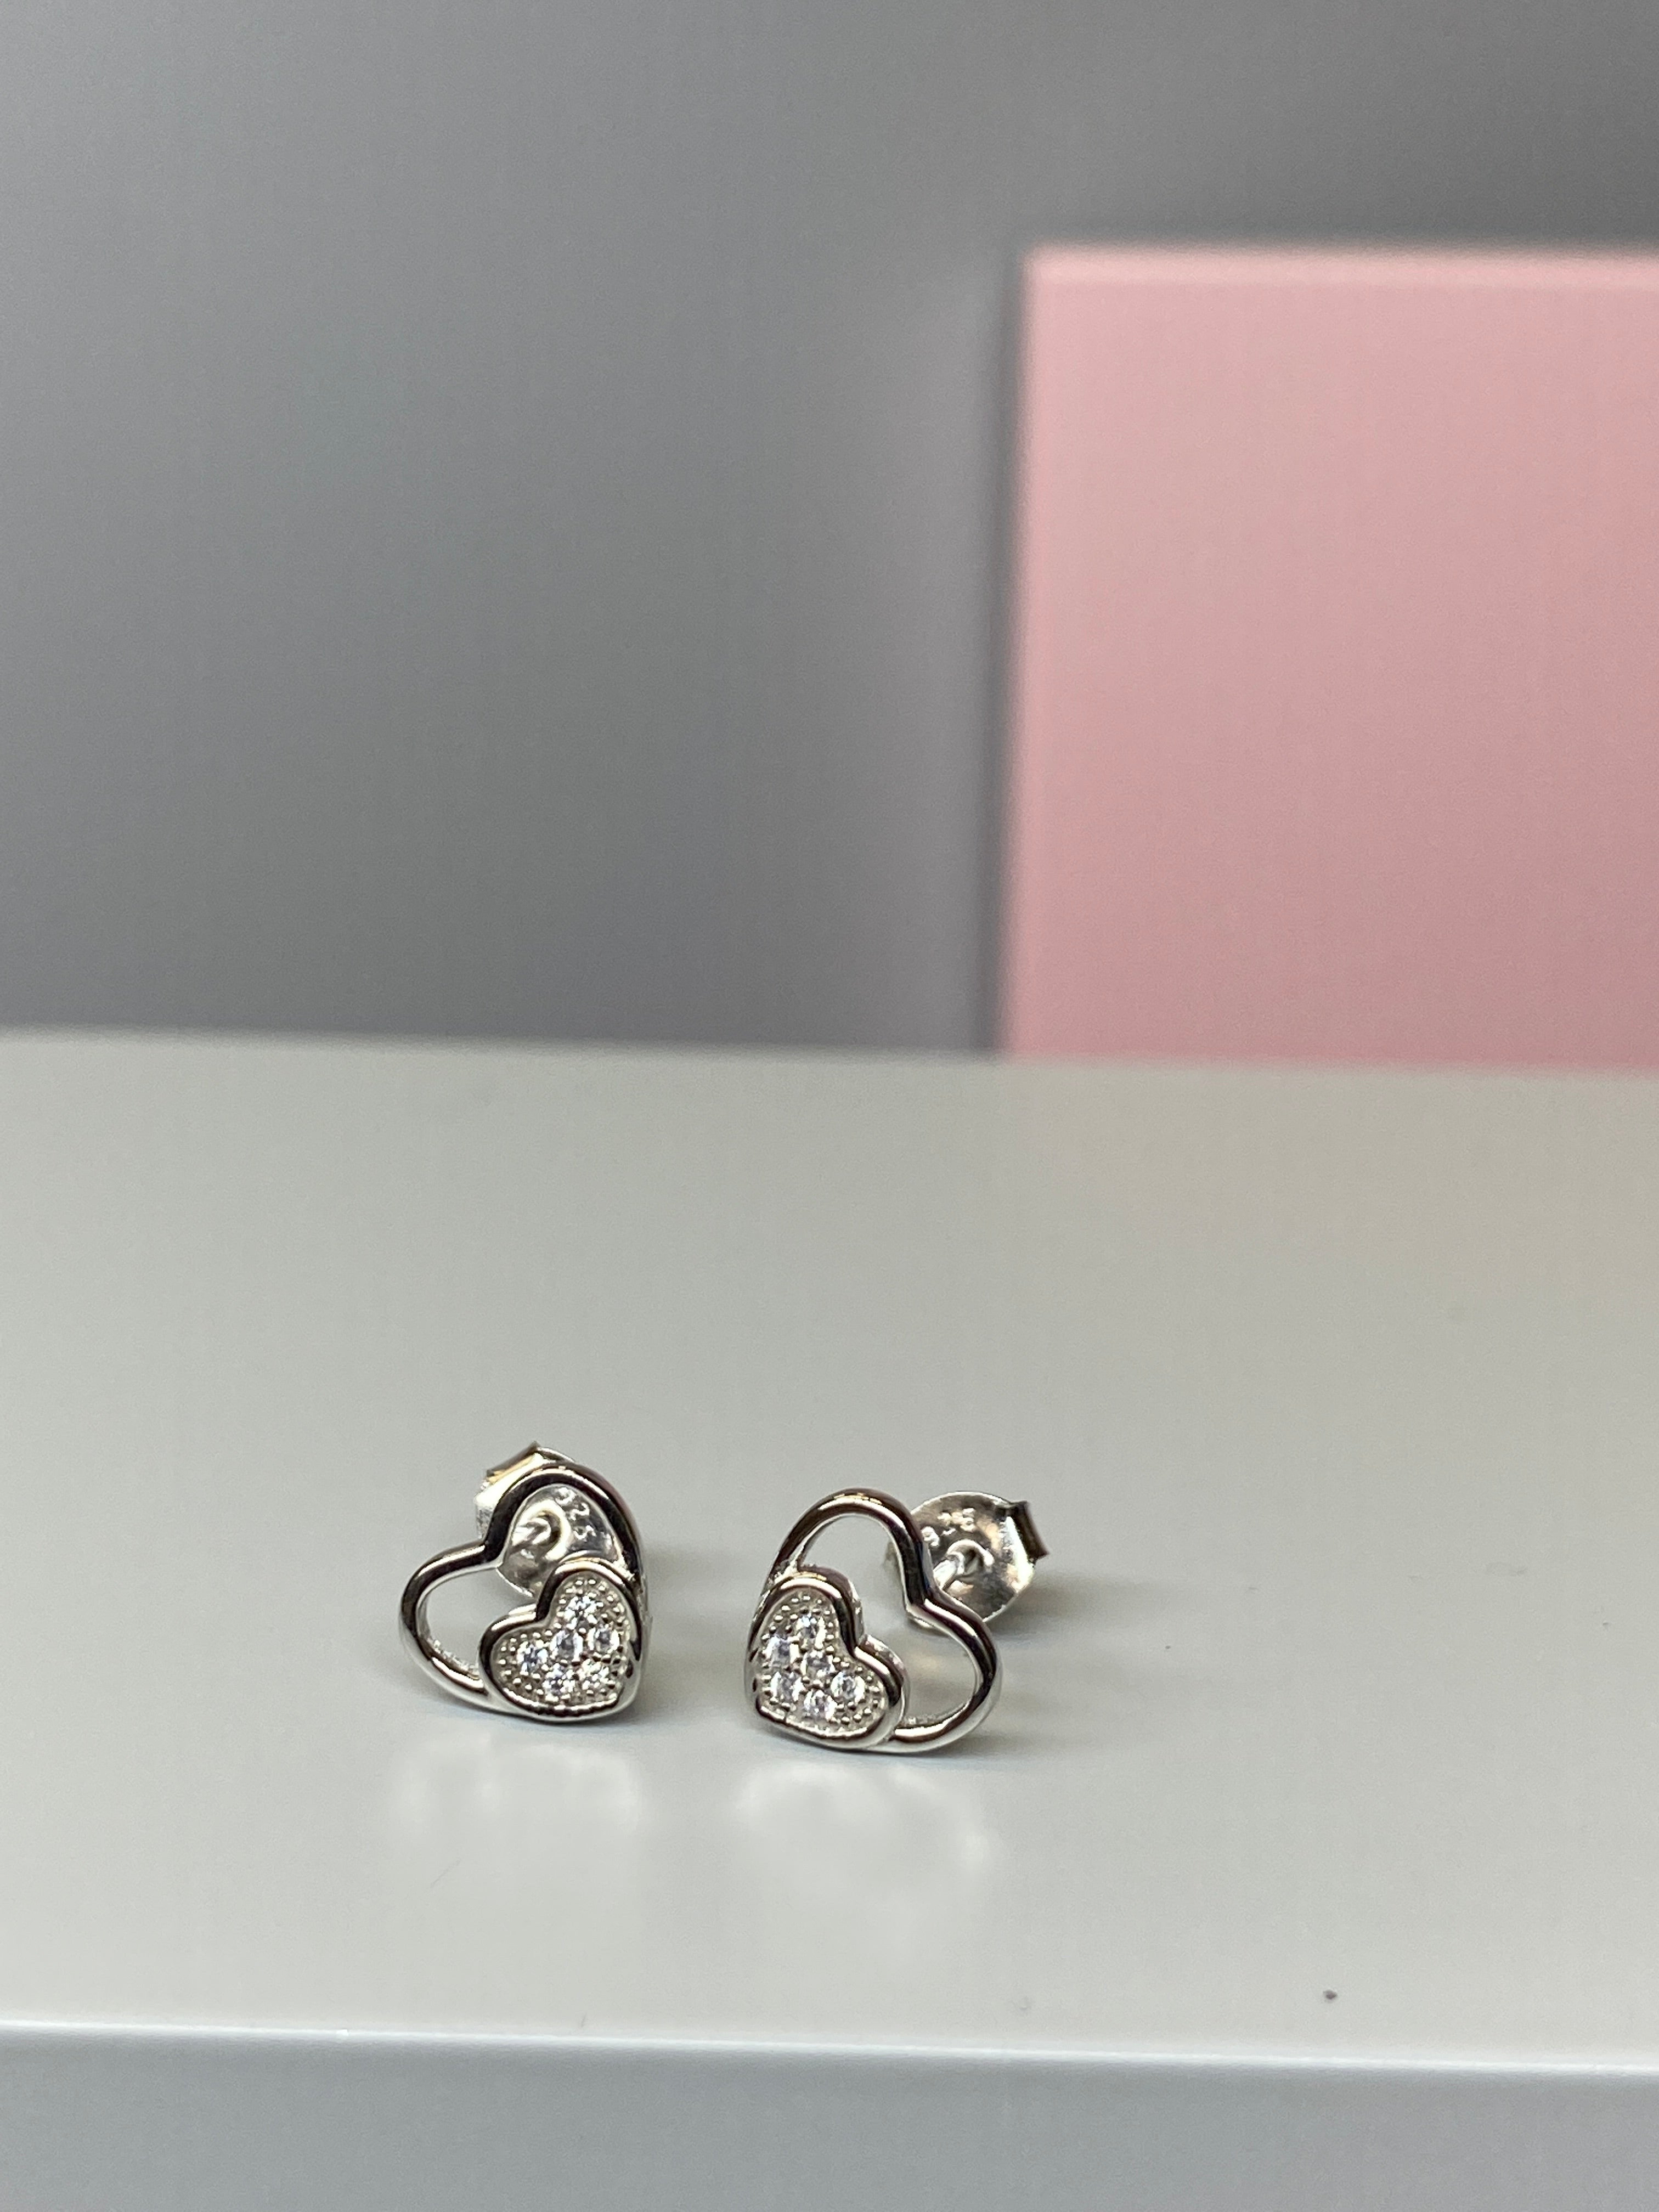 Sterling Silver Double Heart CZ Earrings - 8mm - Hallmark Jewellers Formby & The Jewellers Bench Widnes